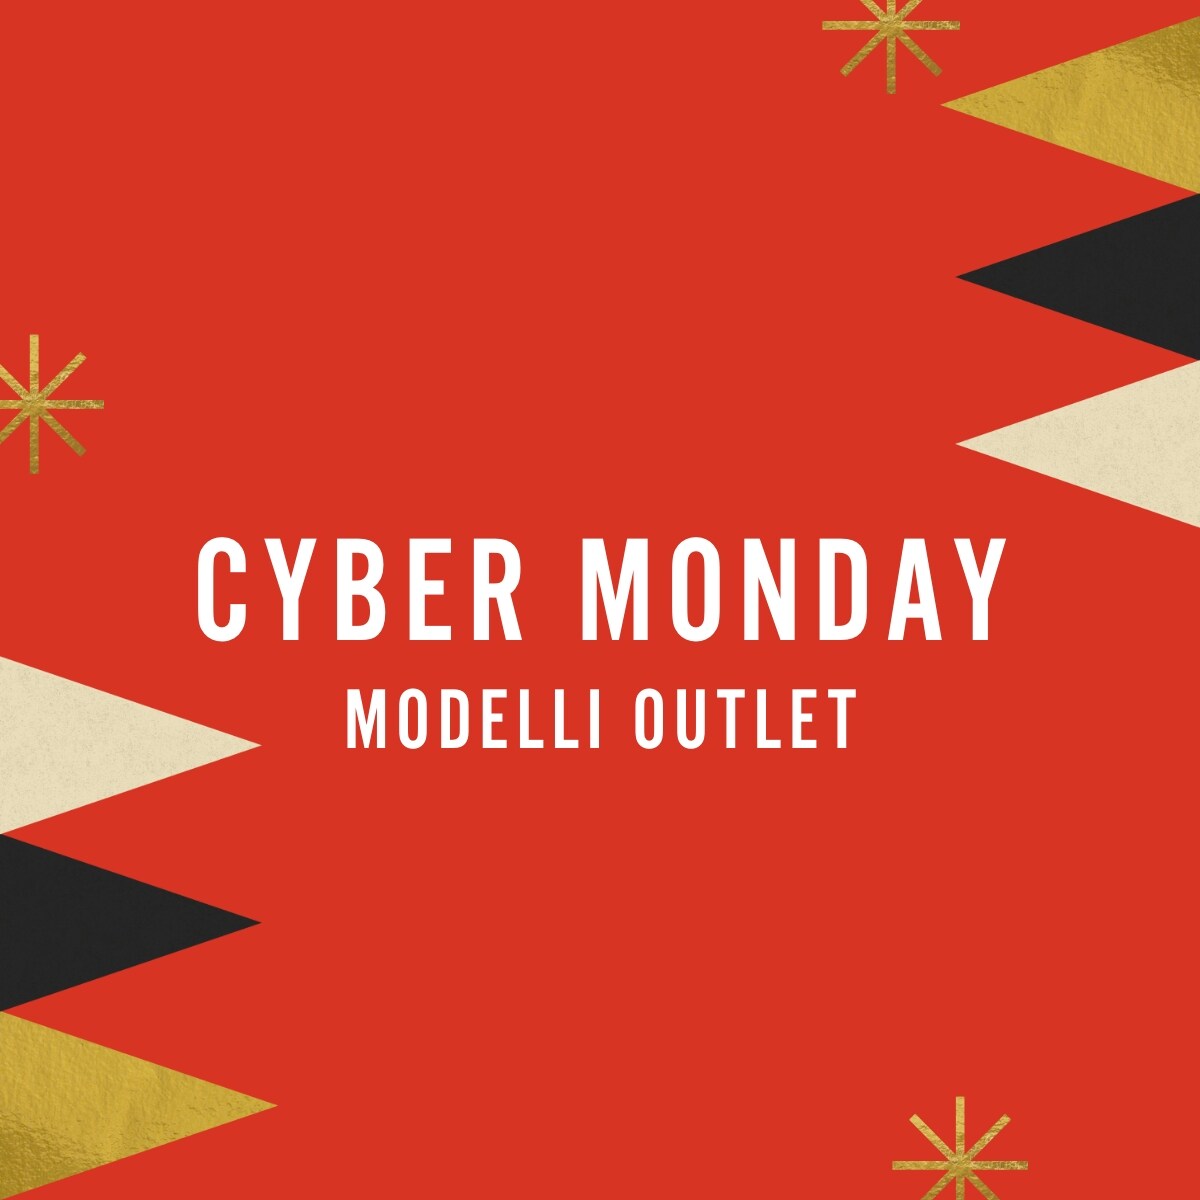 CYBER MONDAY OUTLET STYLES